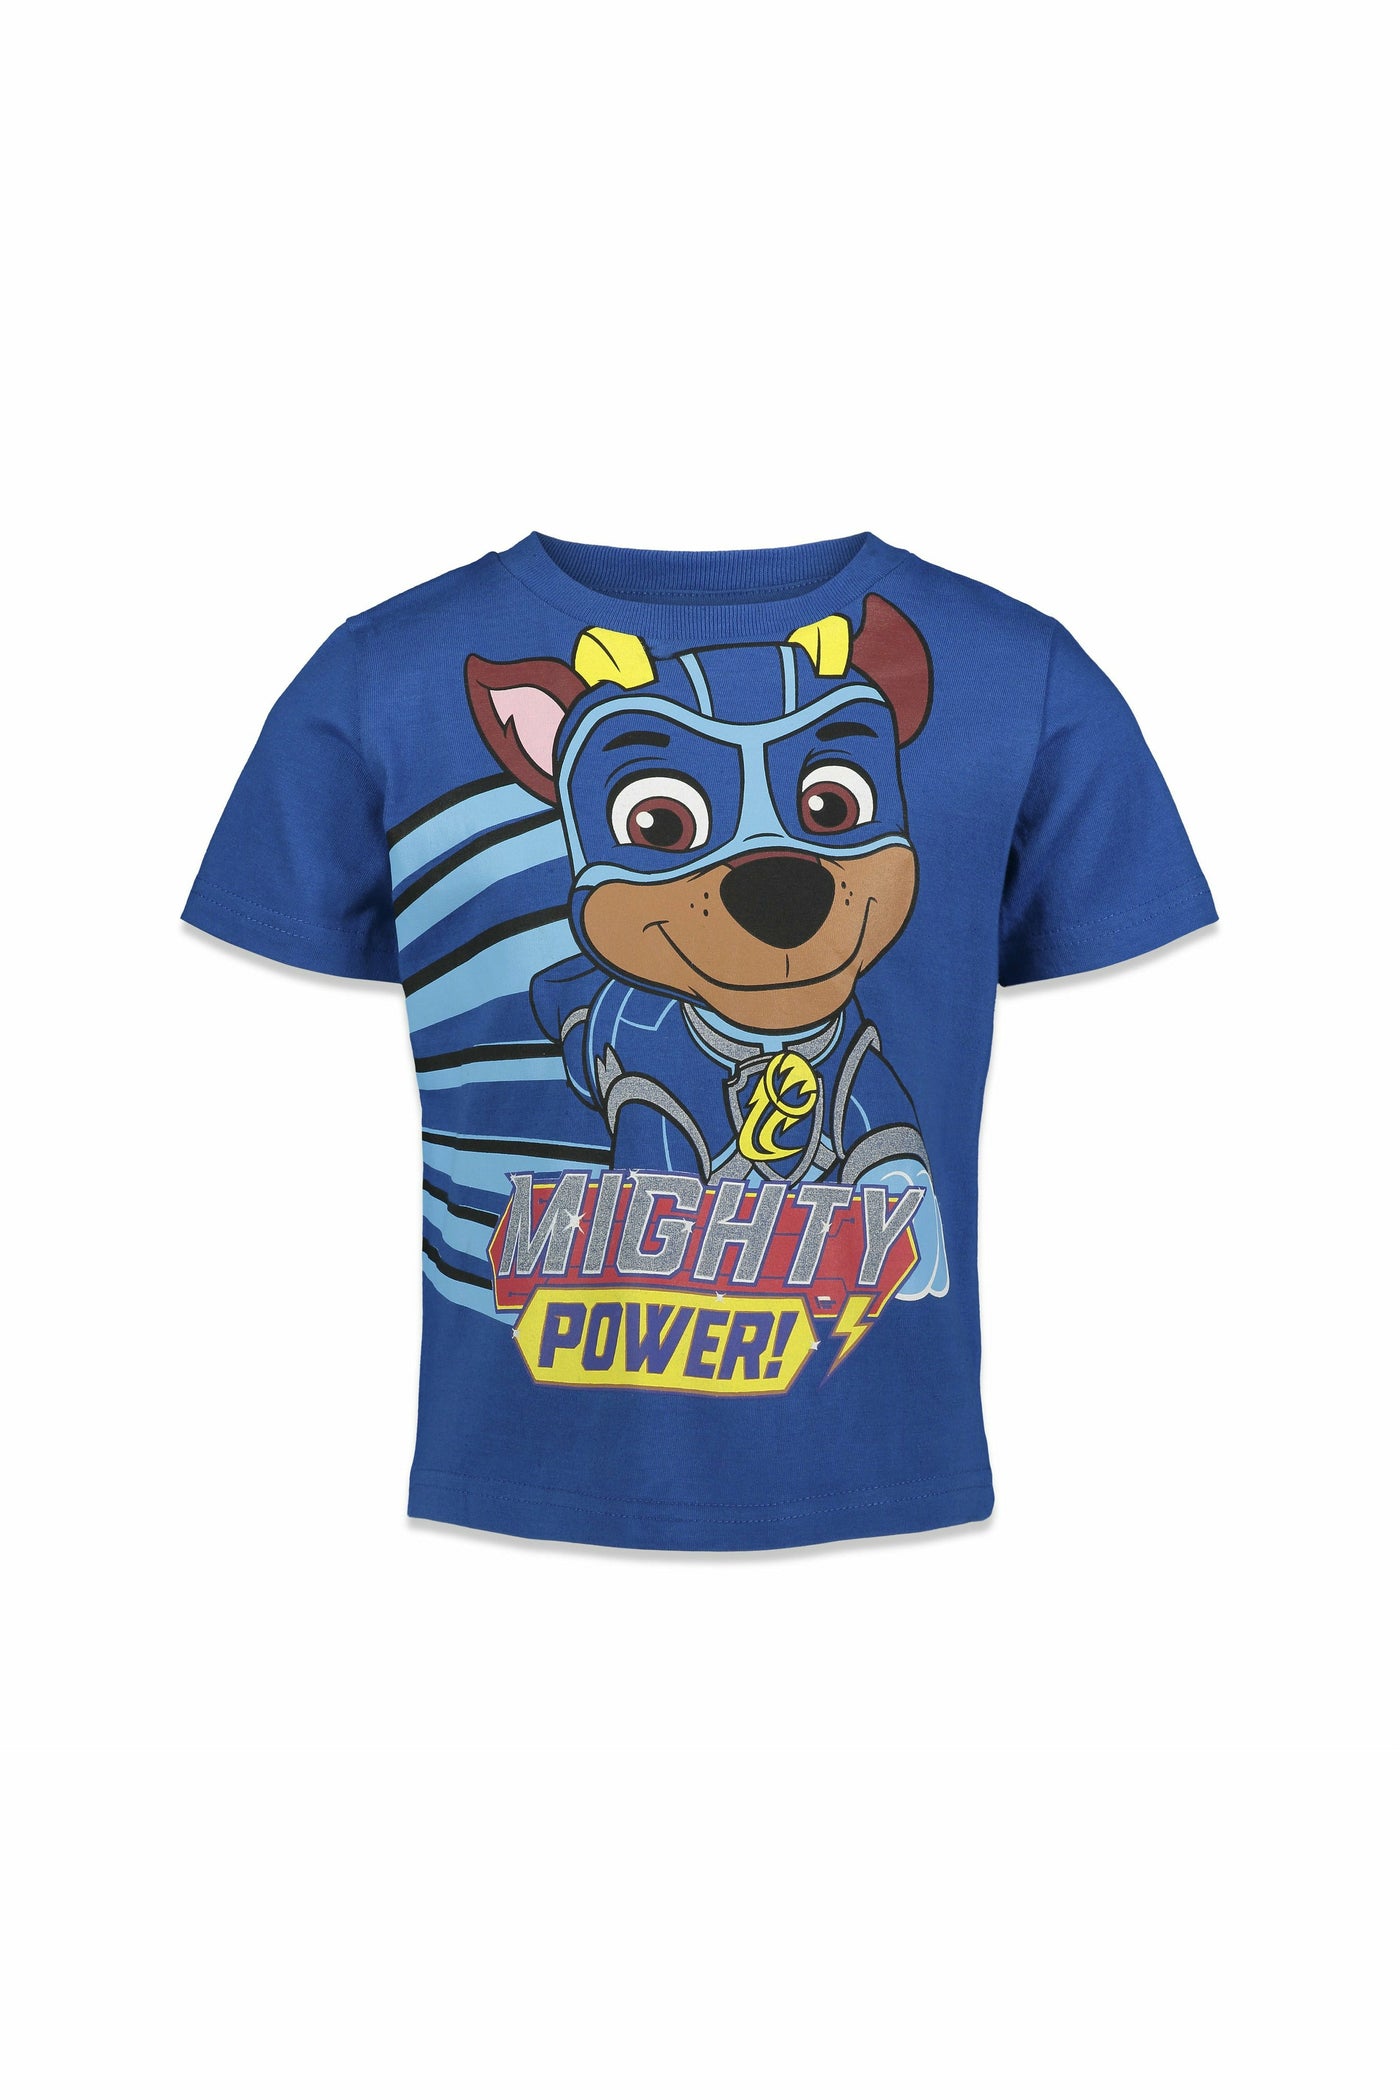 Mighty Pups 3 Pack Graphic T-Shirt